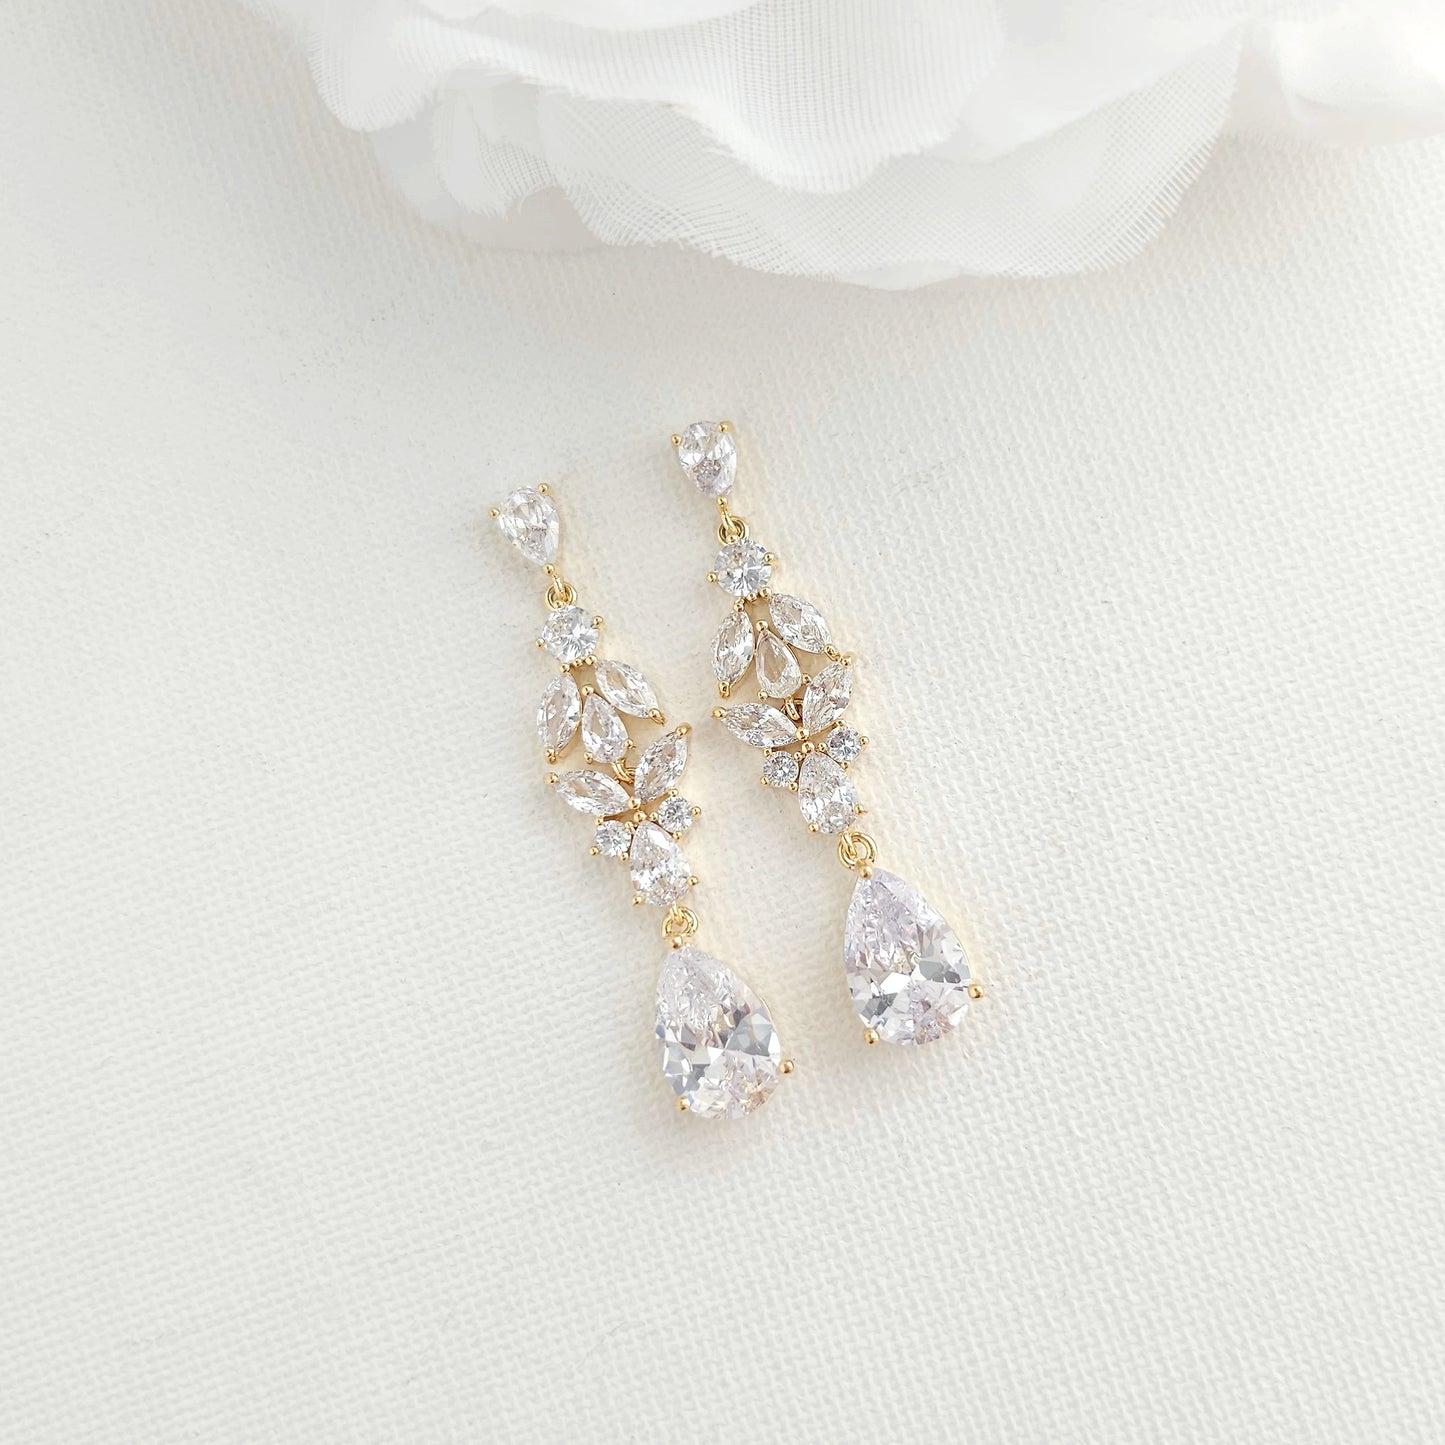 Bridal Drop Earrings in Silver and Cubic Zirconia Stones-Anne